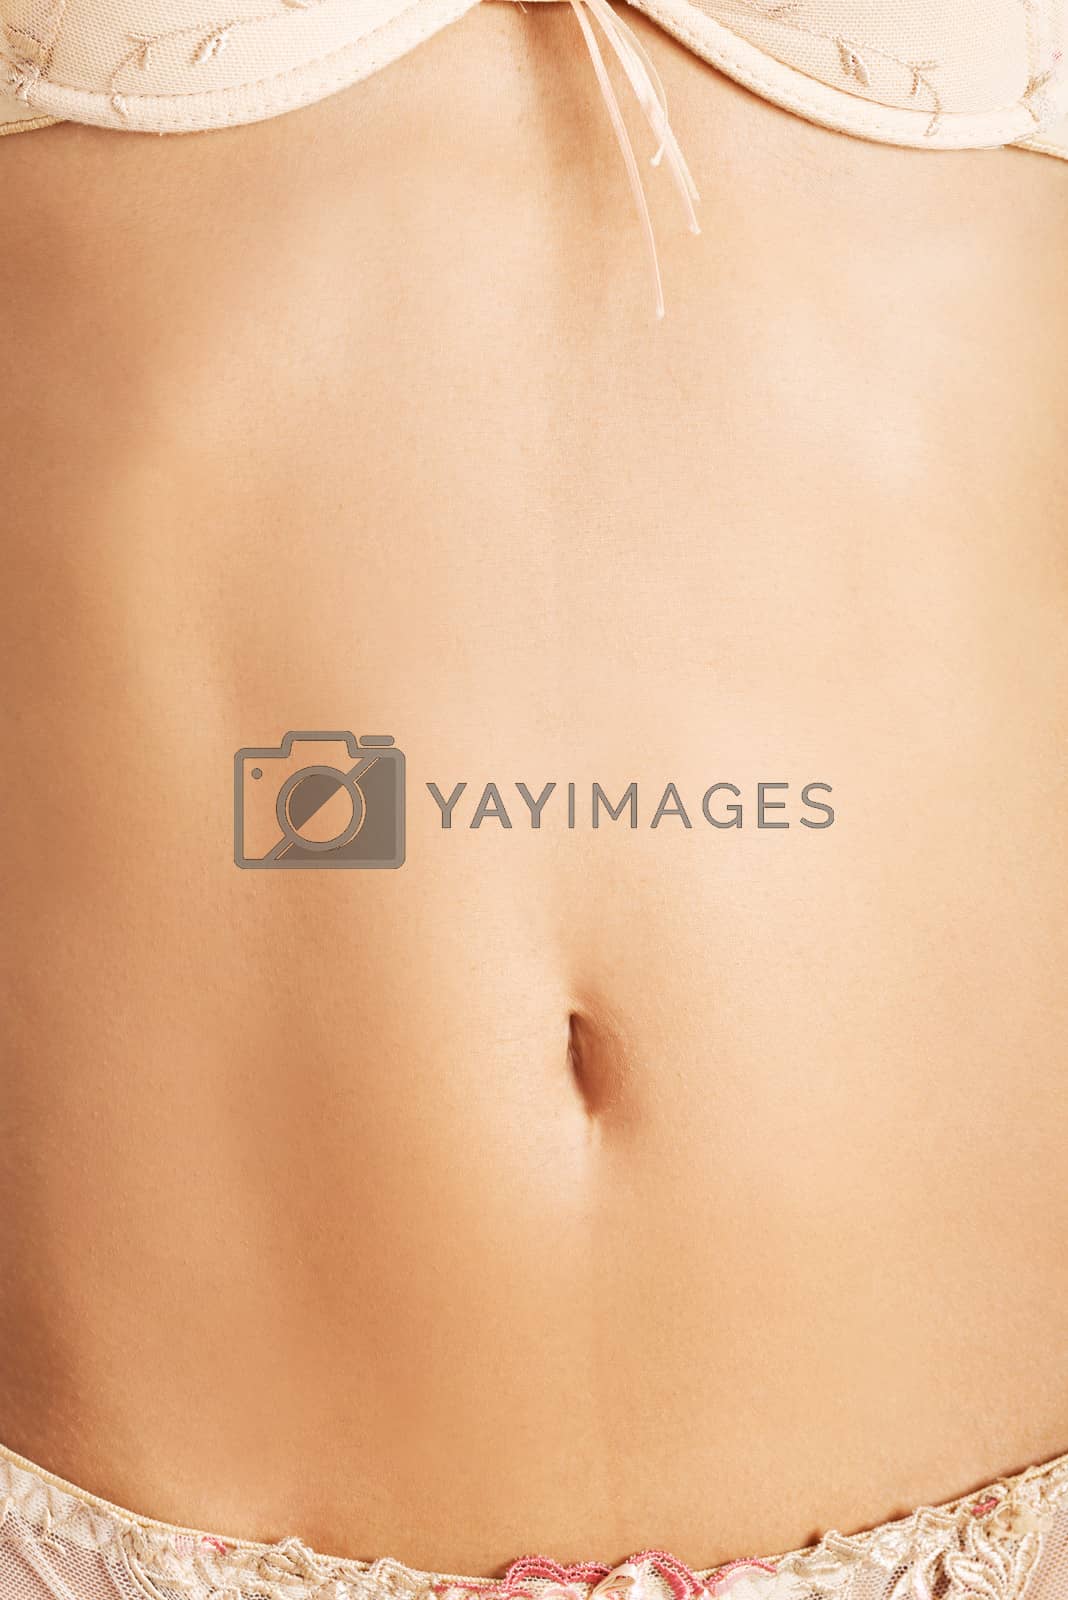 Royalty free image of Fit and slim woman belly by BDS